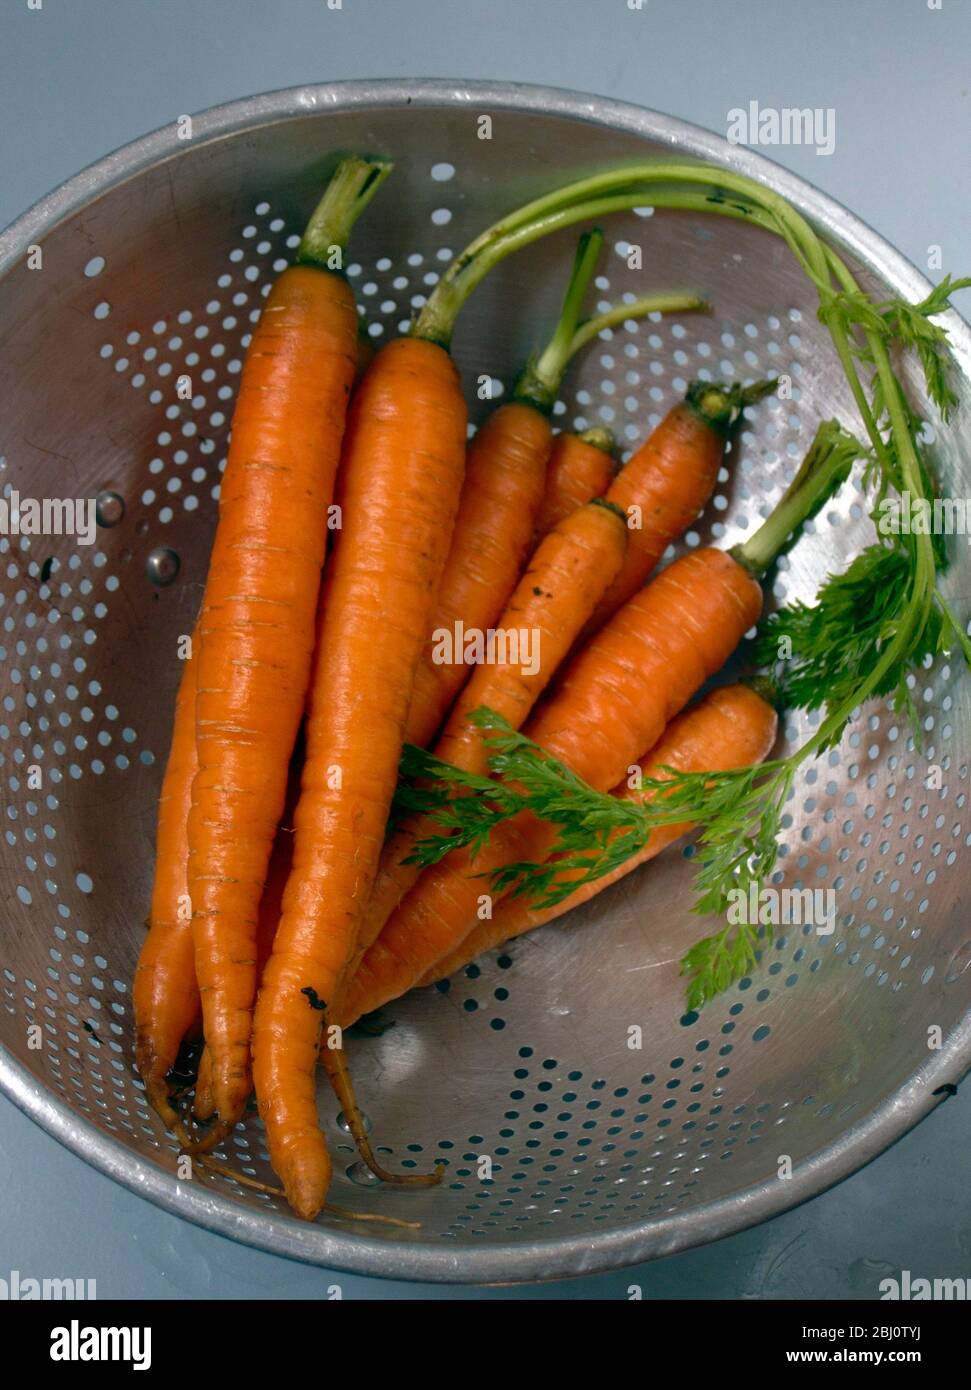 Bunch of fresh young carrots with tops, draining in old aluminium colander - Stock Photo